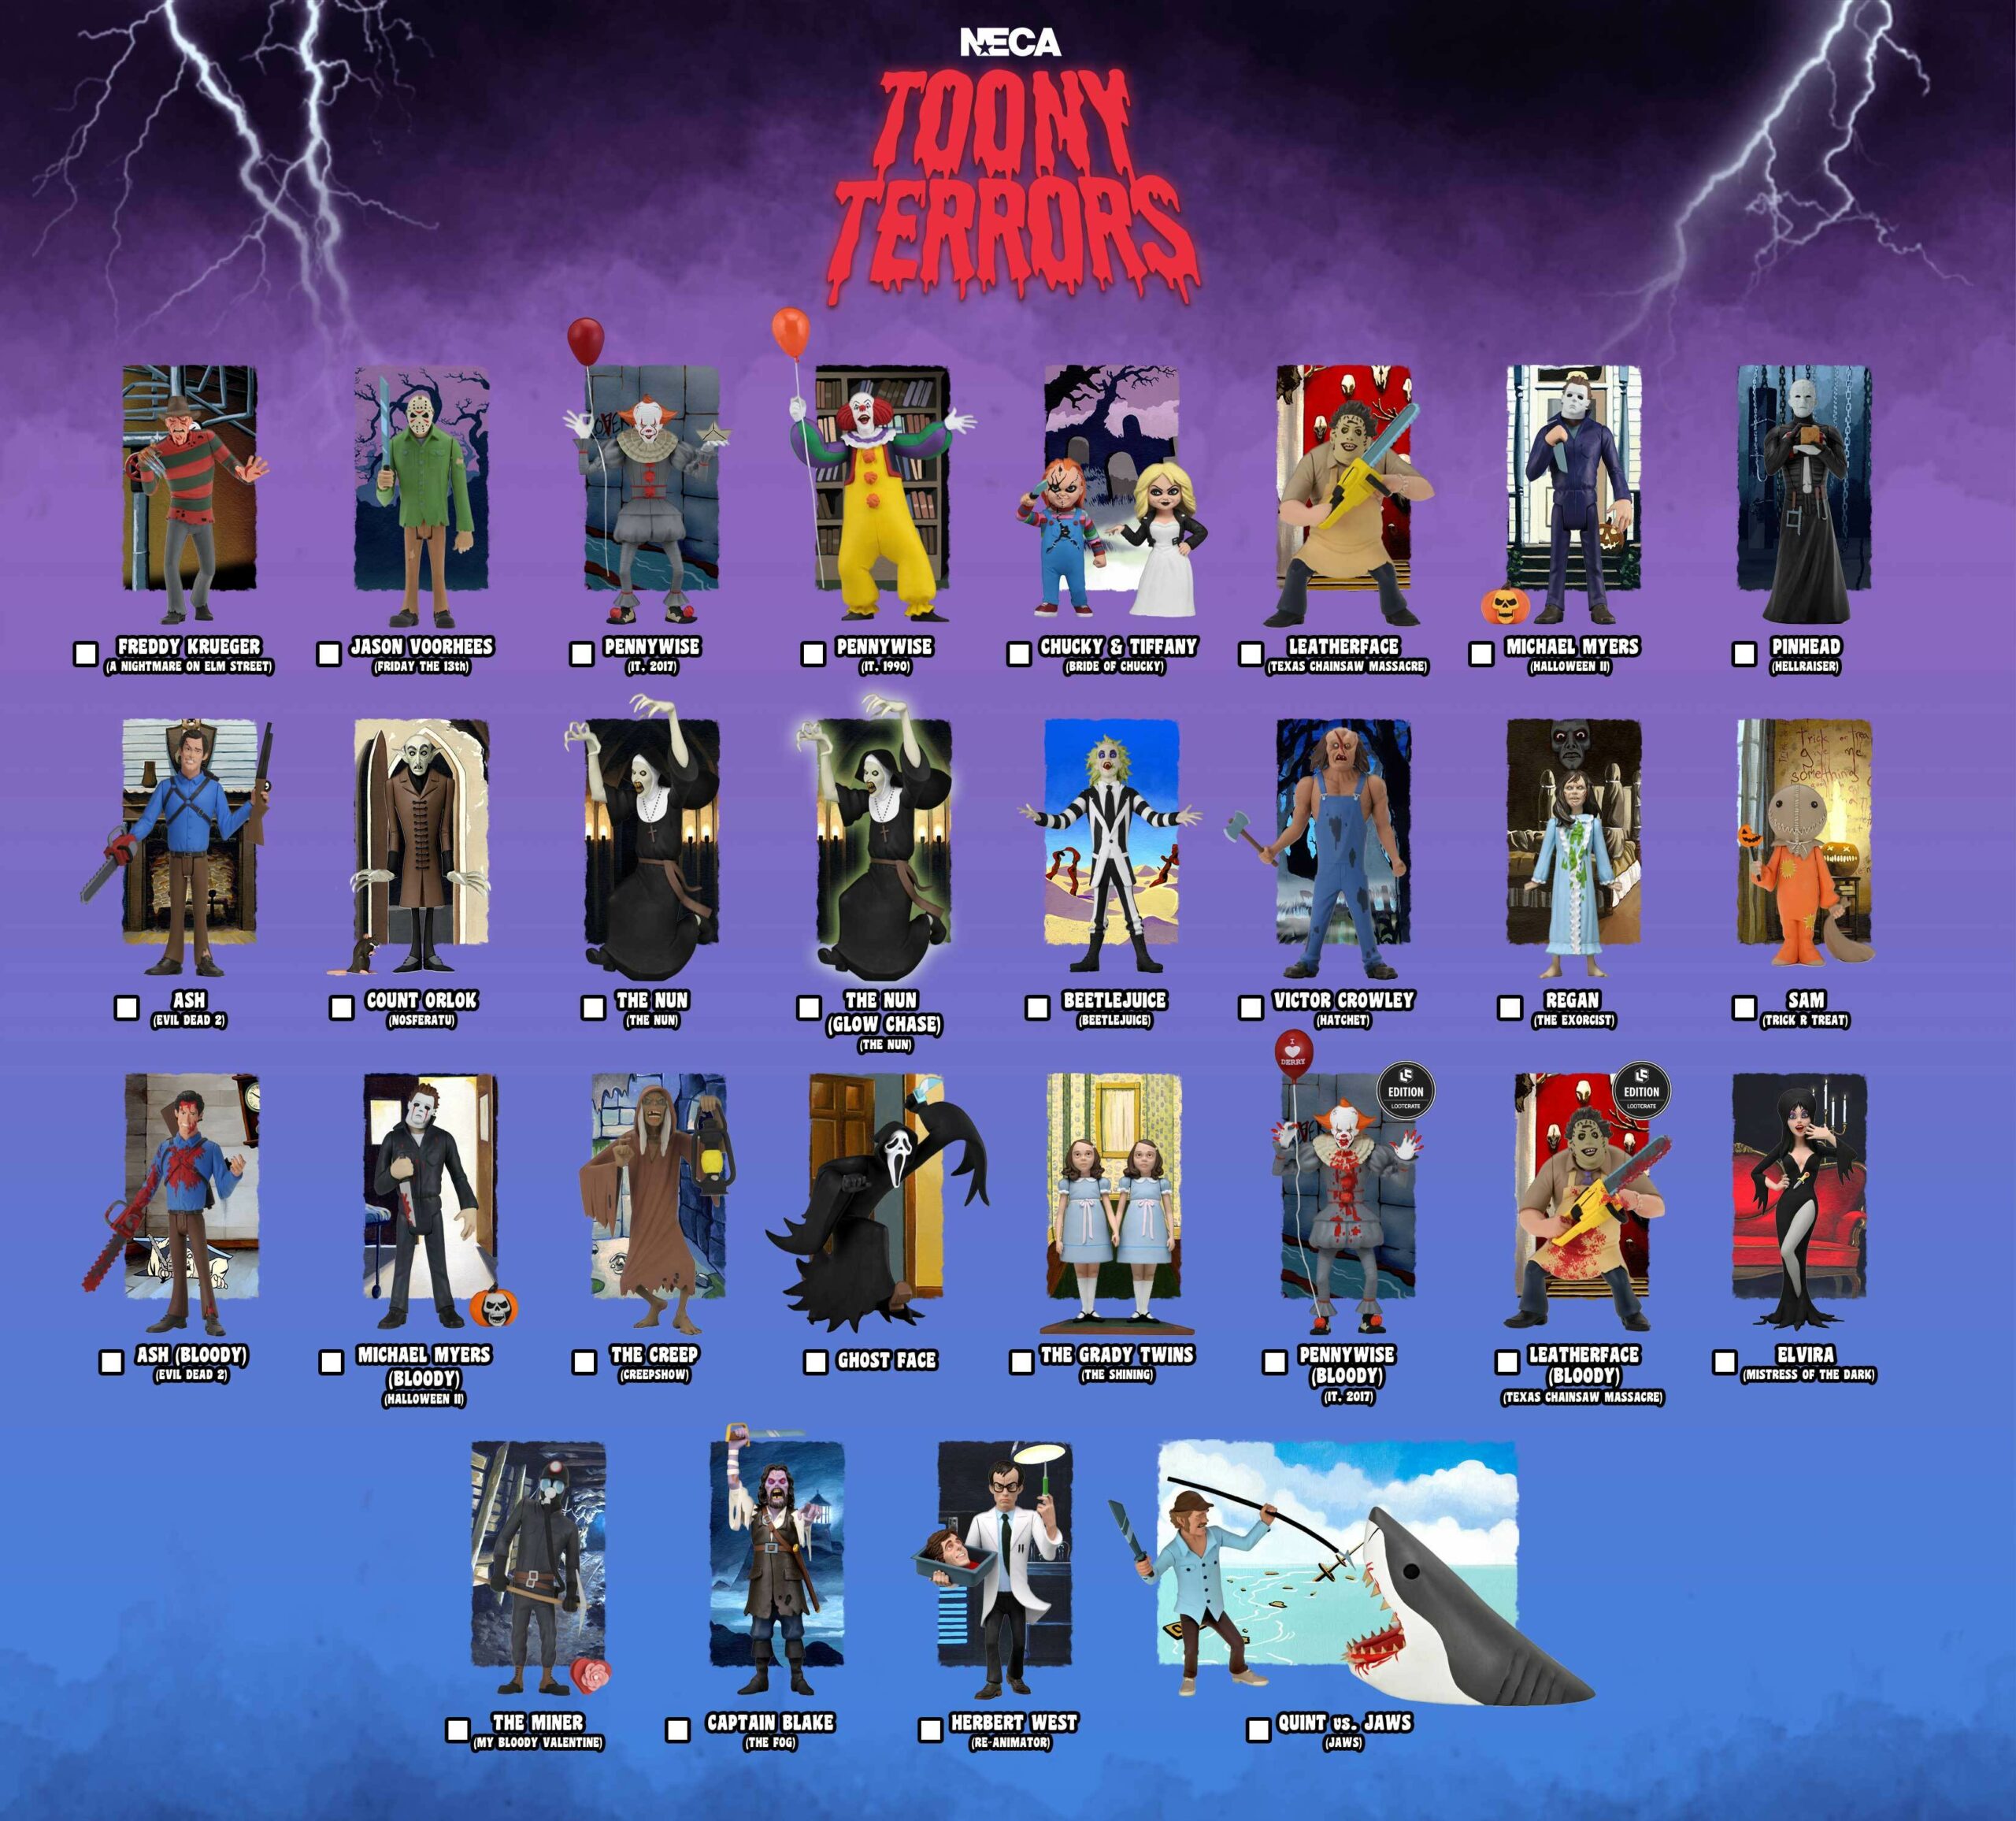 NECAOnline.com | 12 Days of Downloads 2021 – Day 1: Toony Terrors Action Figure Visual Guide